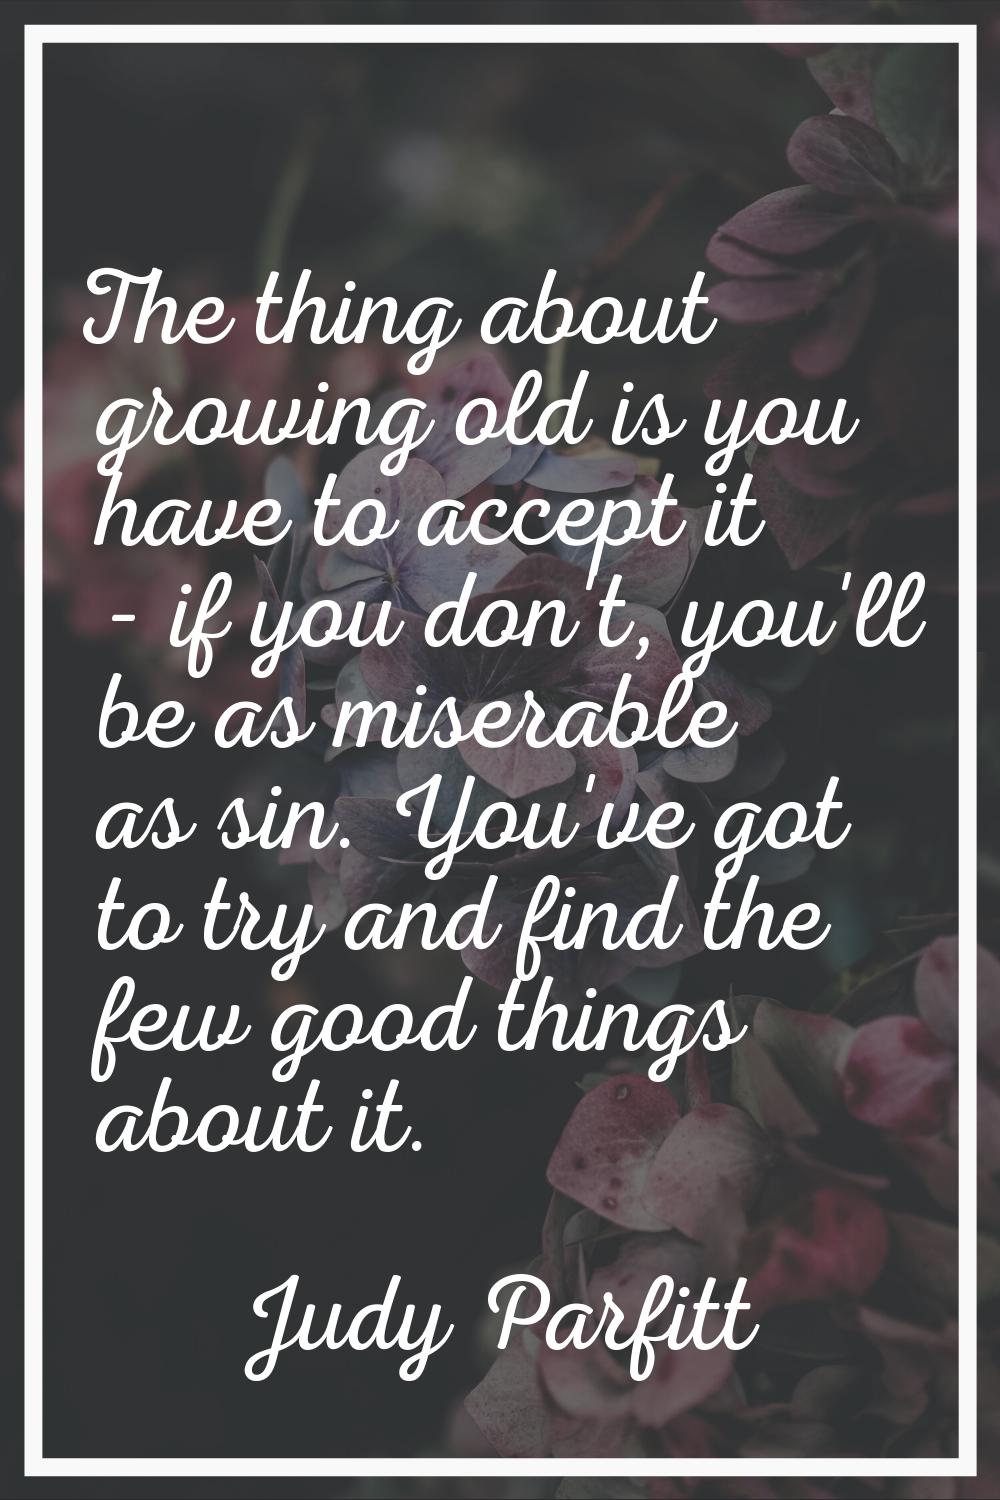 The thing about growing old is you have to accept it - if you don't, you'll be as miserable as sin.